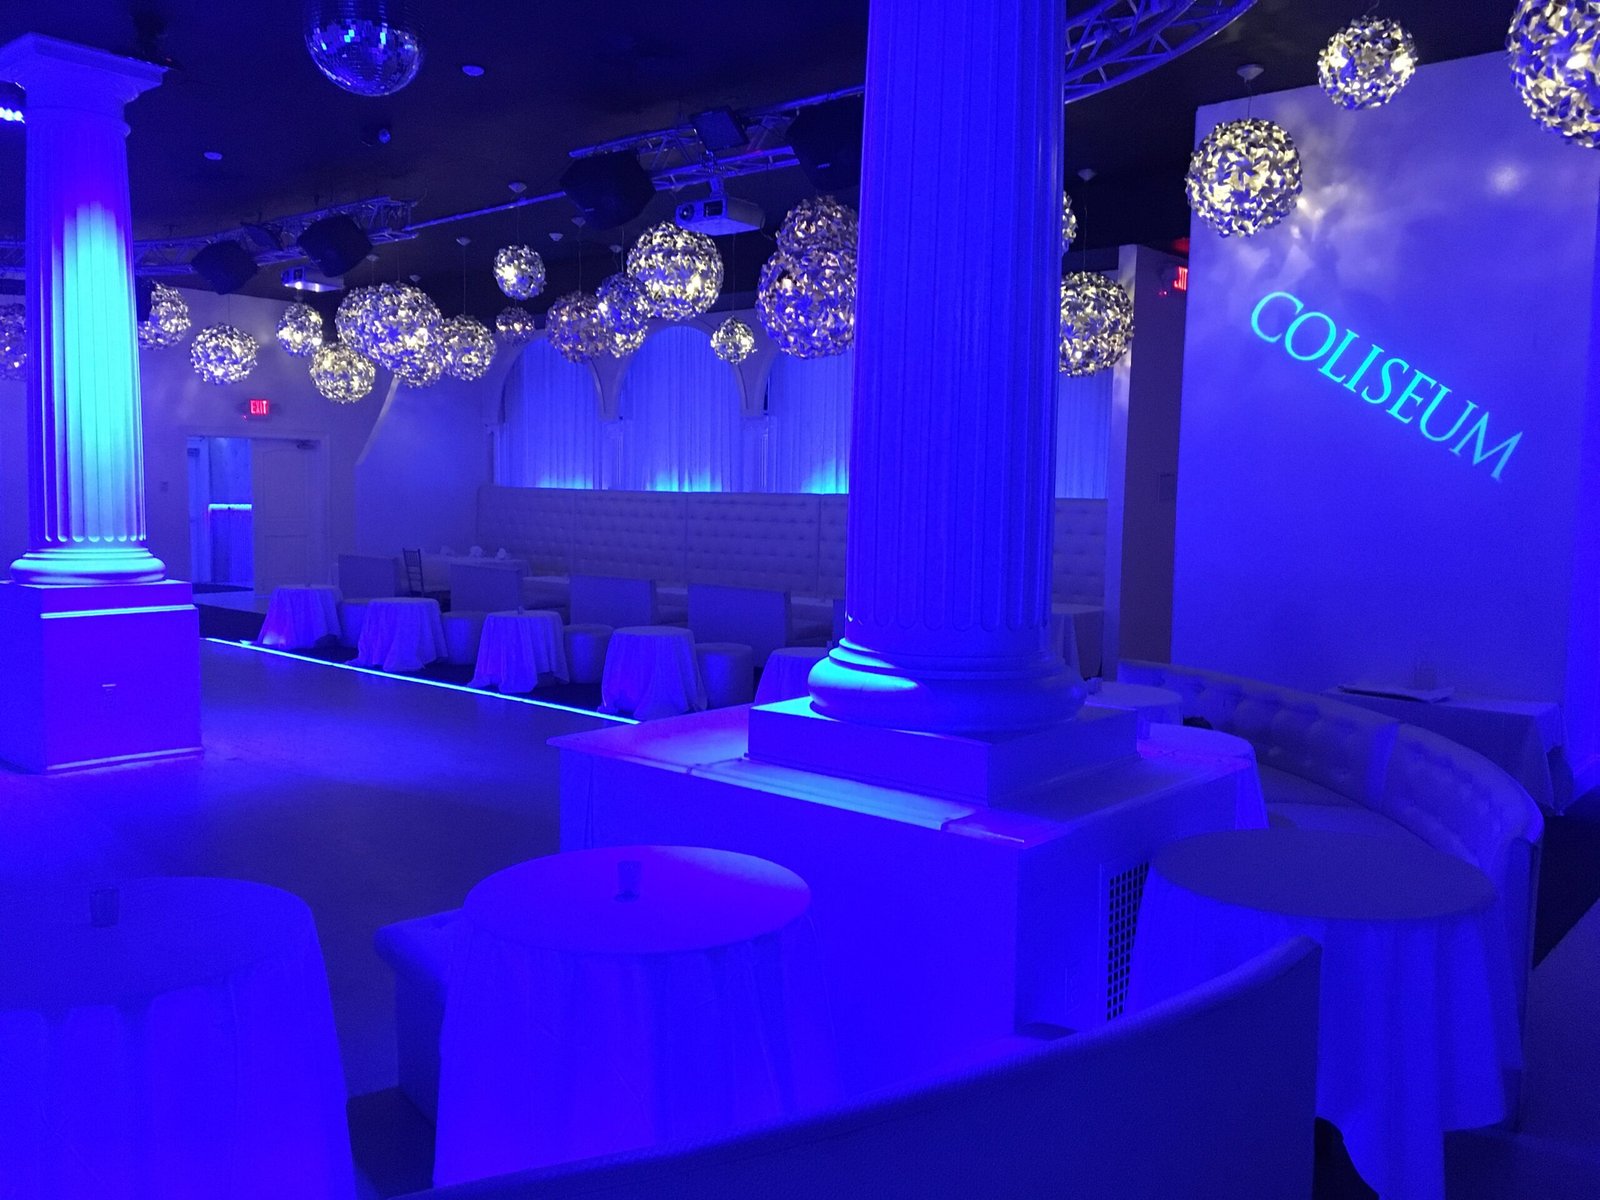 COLISEUM: The Ideal Venue to Make the Company’s Holiday Party A Memorable Celebration